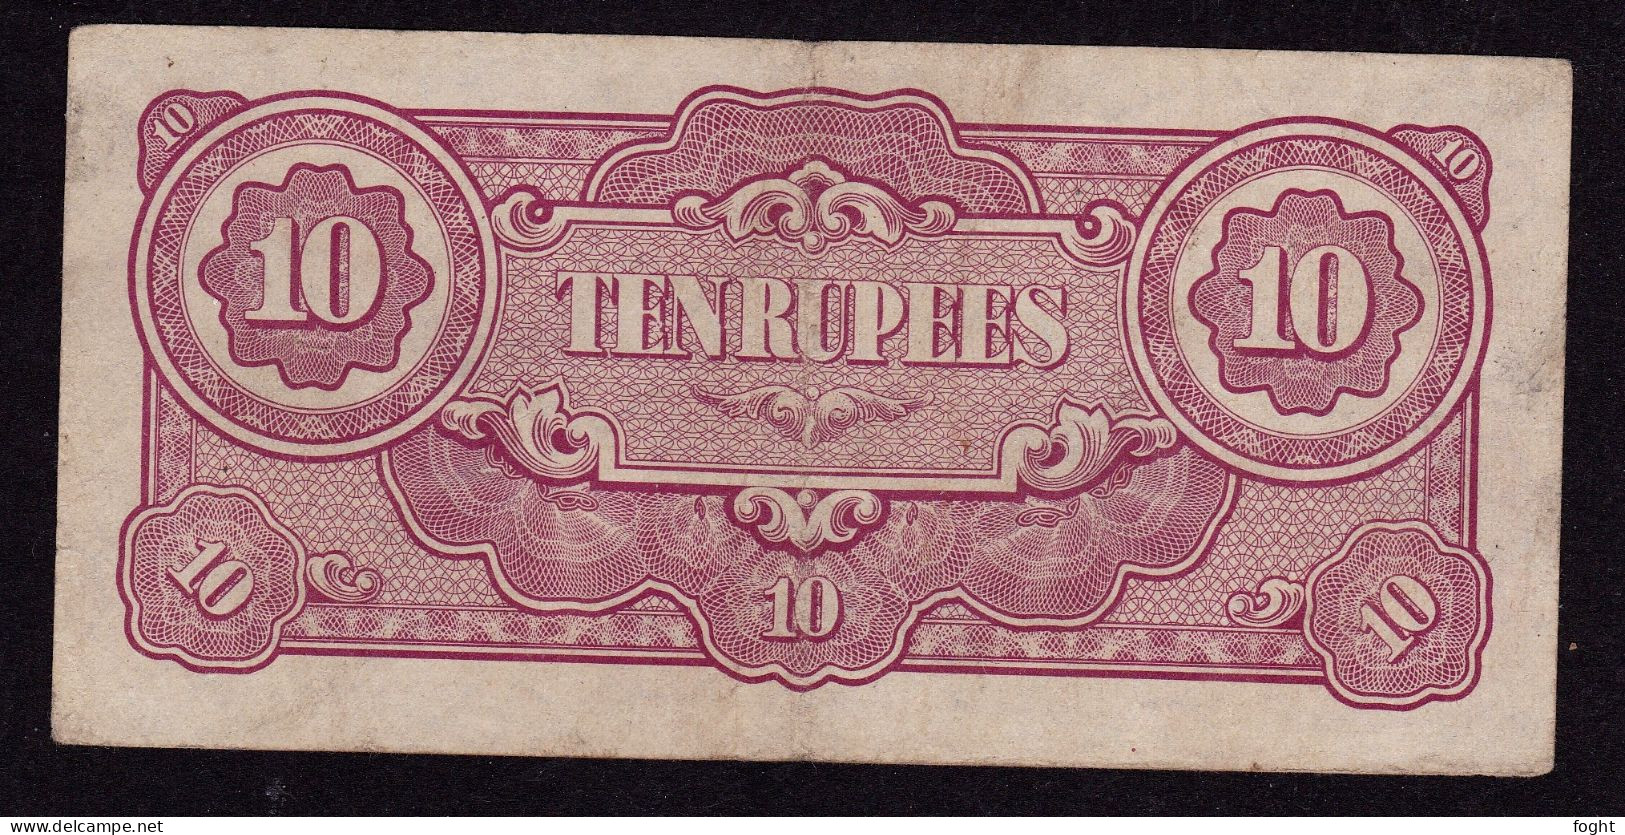 Japanese Government (Burma) Ten (10) Rupees Note - From 1942-45 (WWII) - Japon